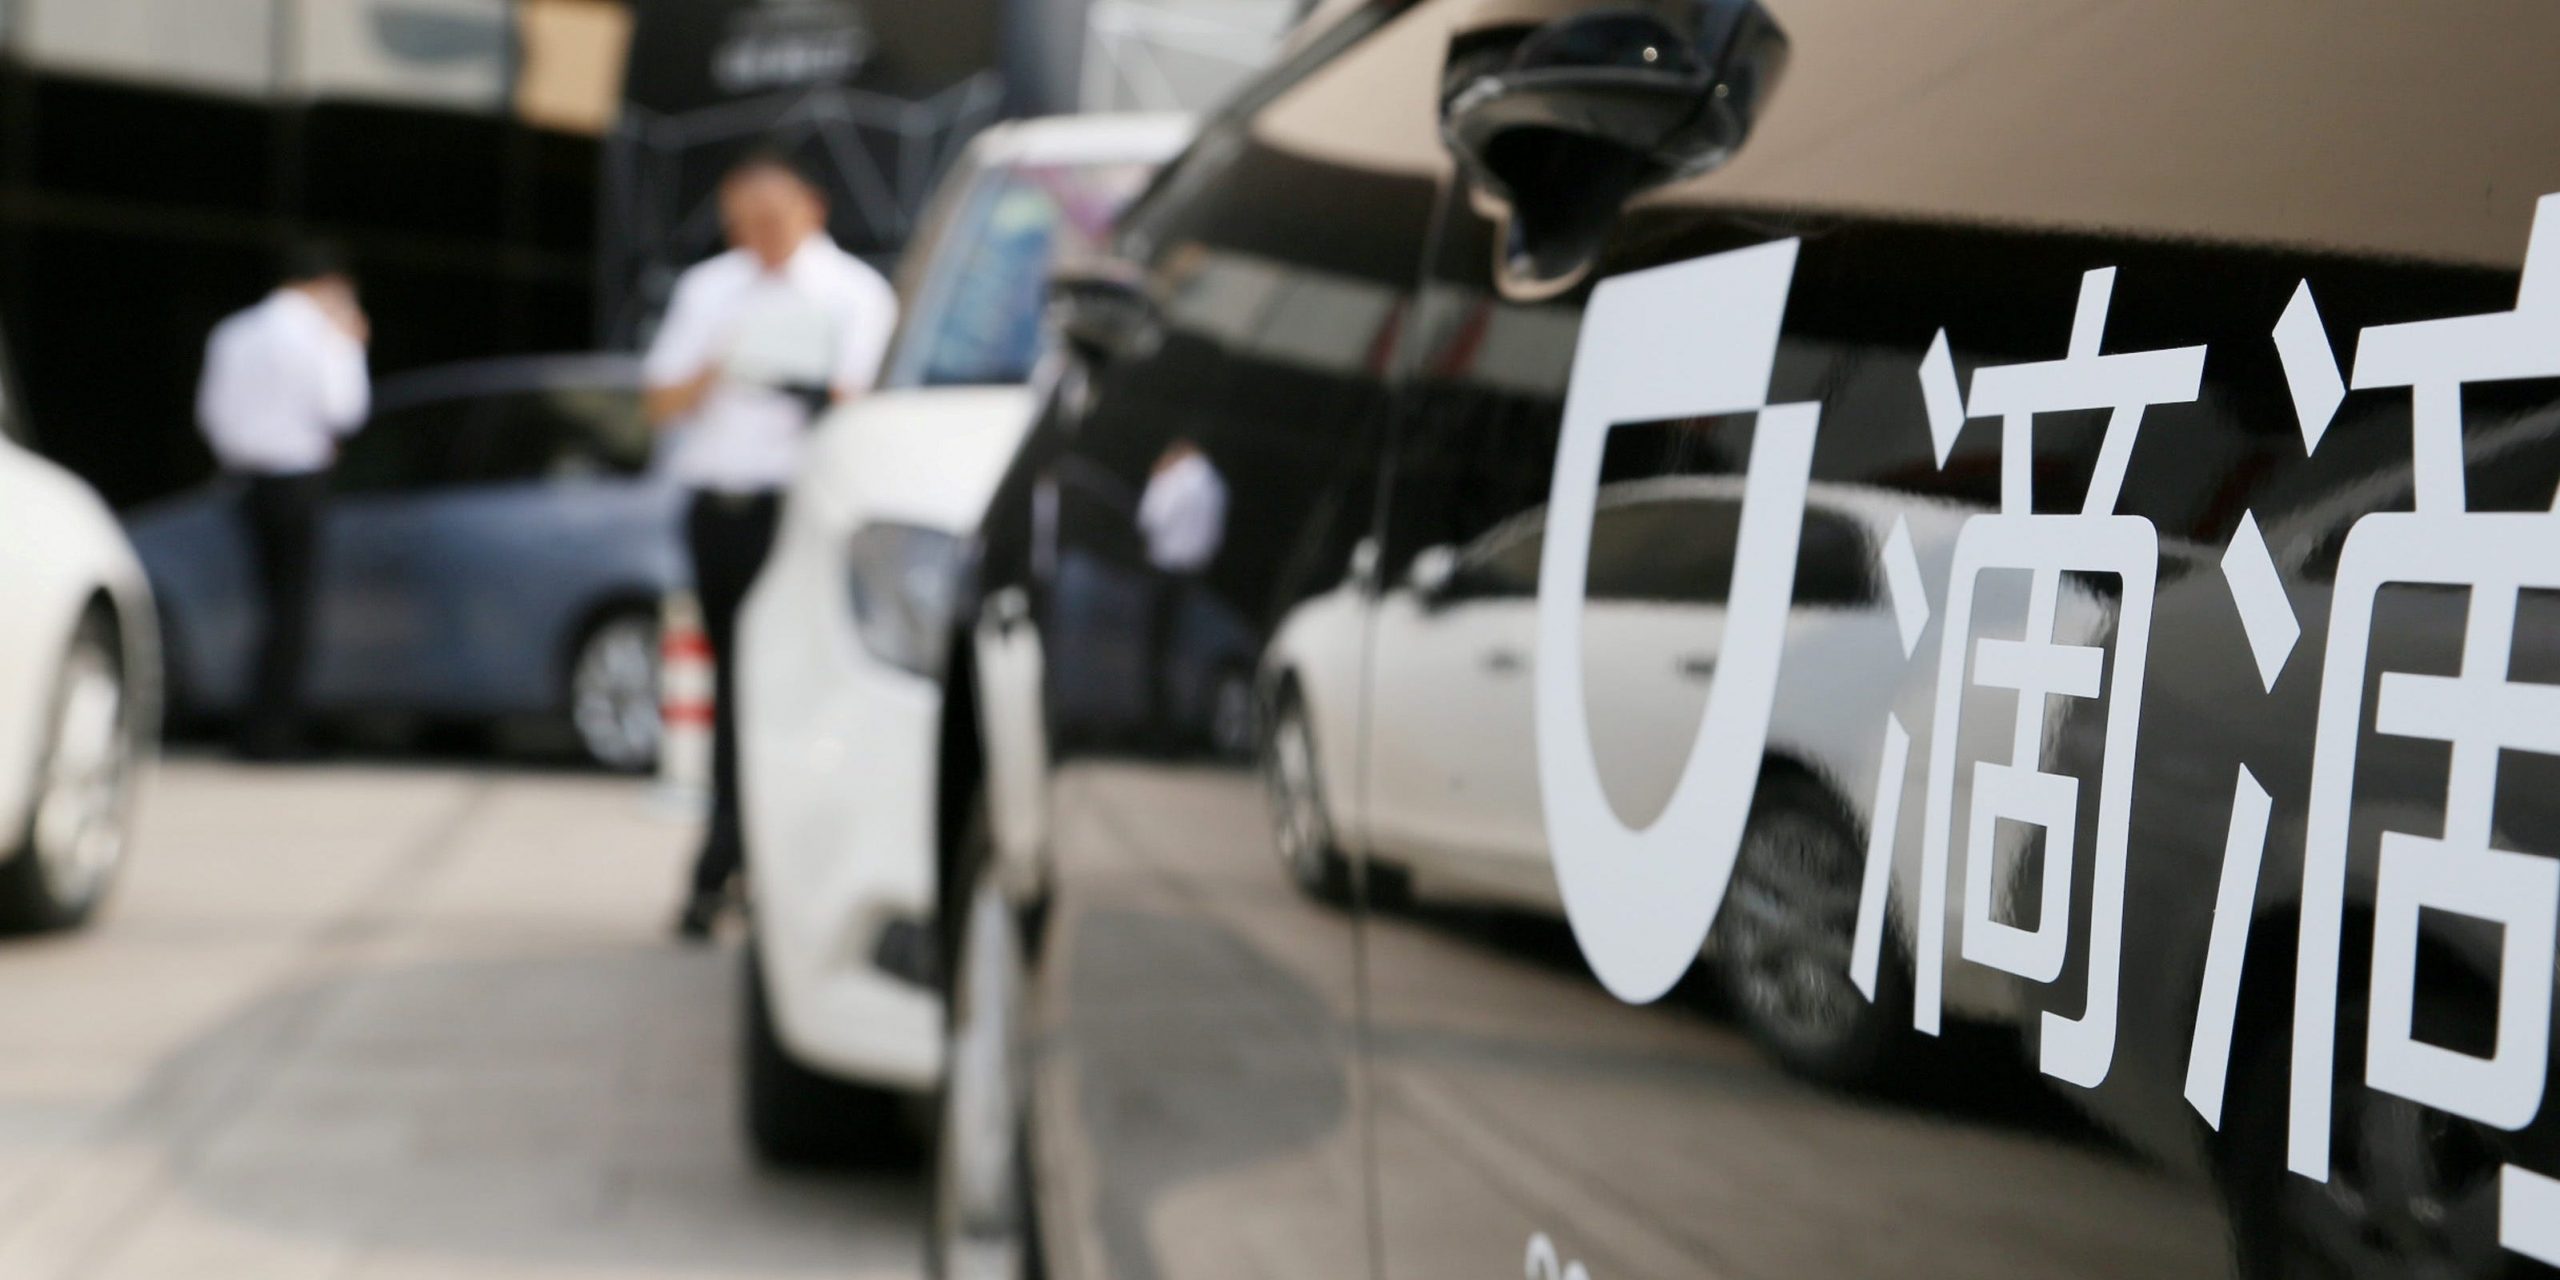 FILE PHOTO: A Didi sign is seen on a car during the China Internet Conference in Beijing, China June 21, 2016. REUTERS/Stringer/File Photo  